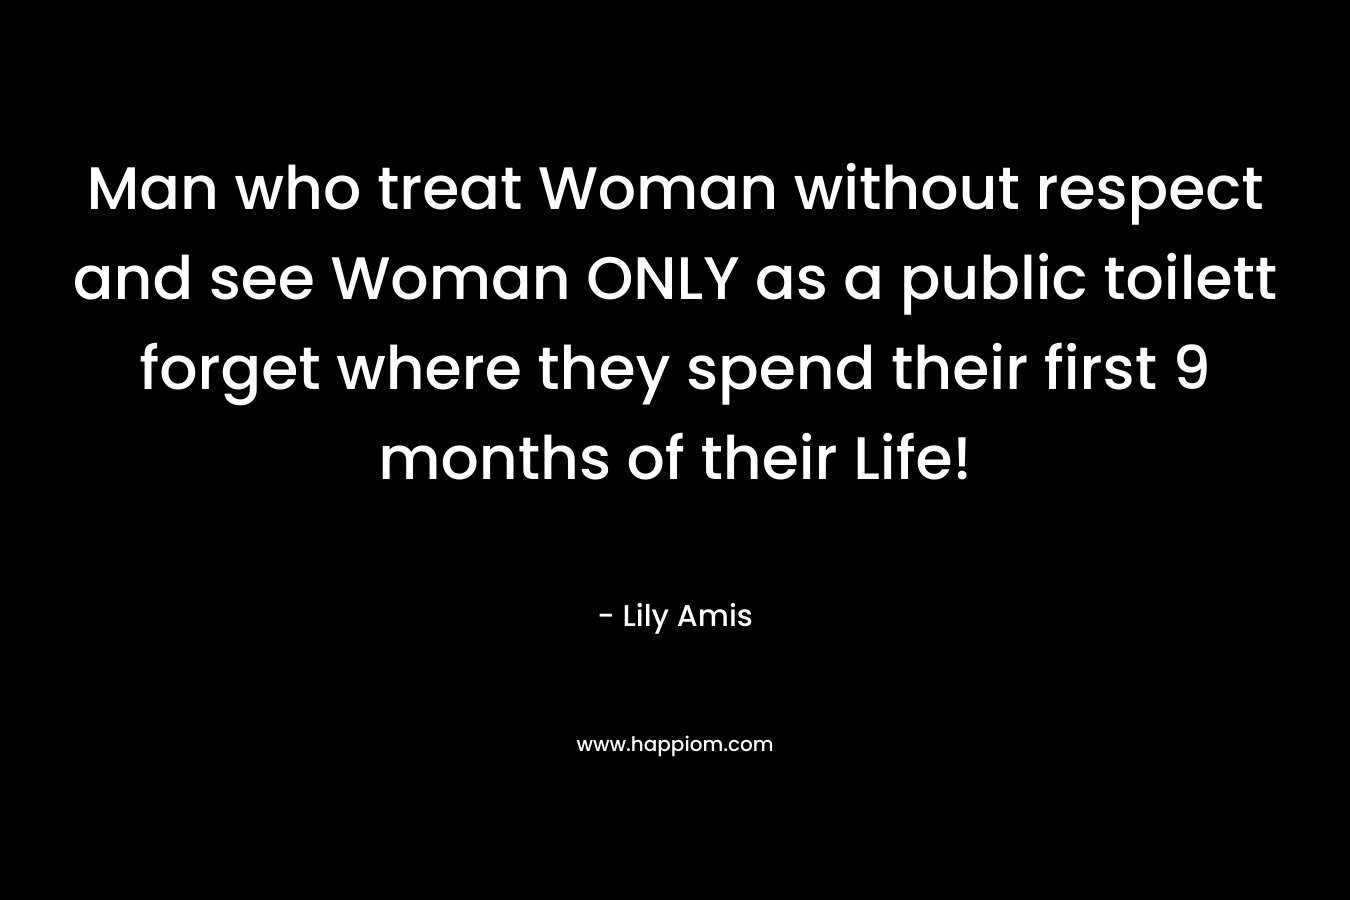 Man who treat Woman without respect and see Woman ONLY as a public toilett forget where they spend their first 9 months of their Life!